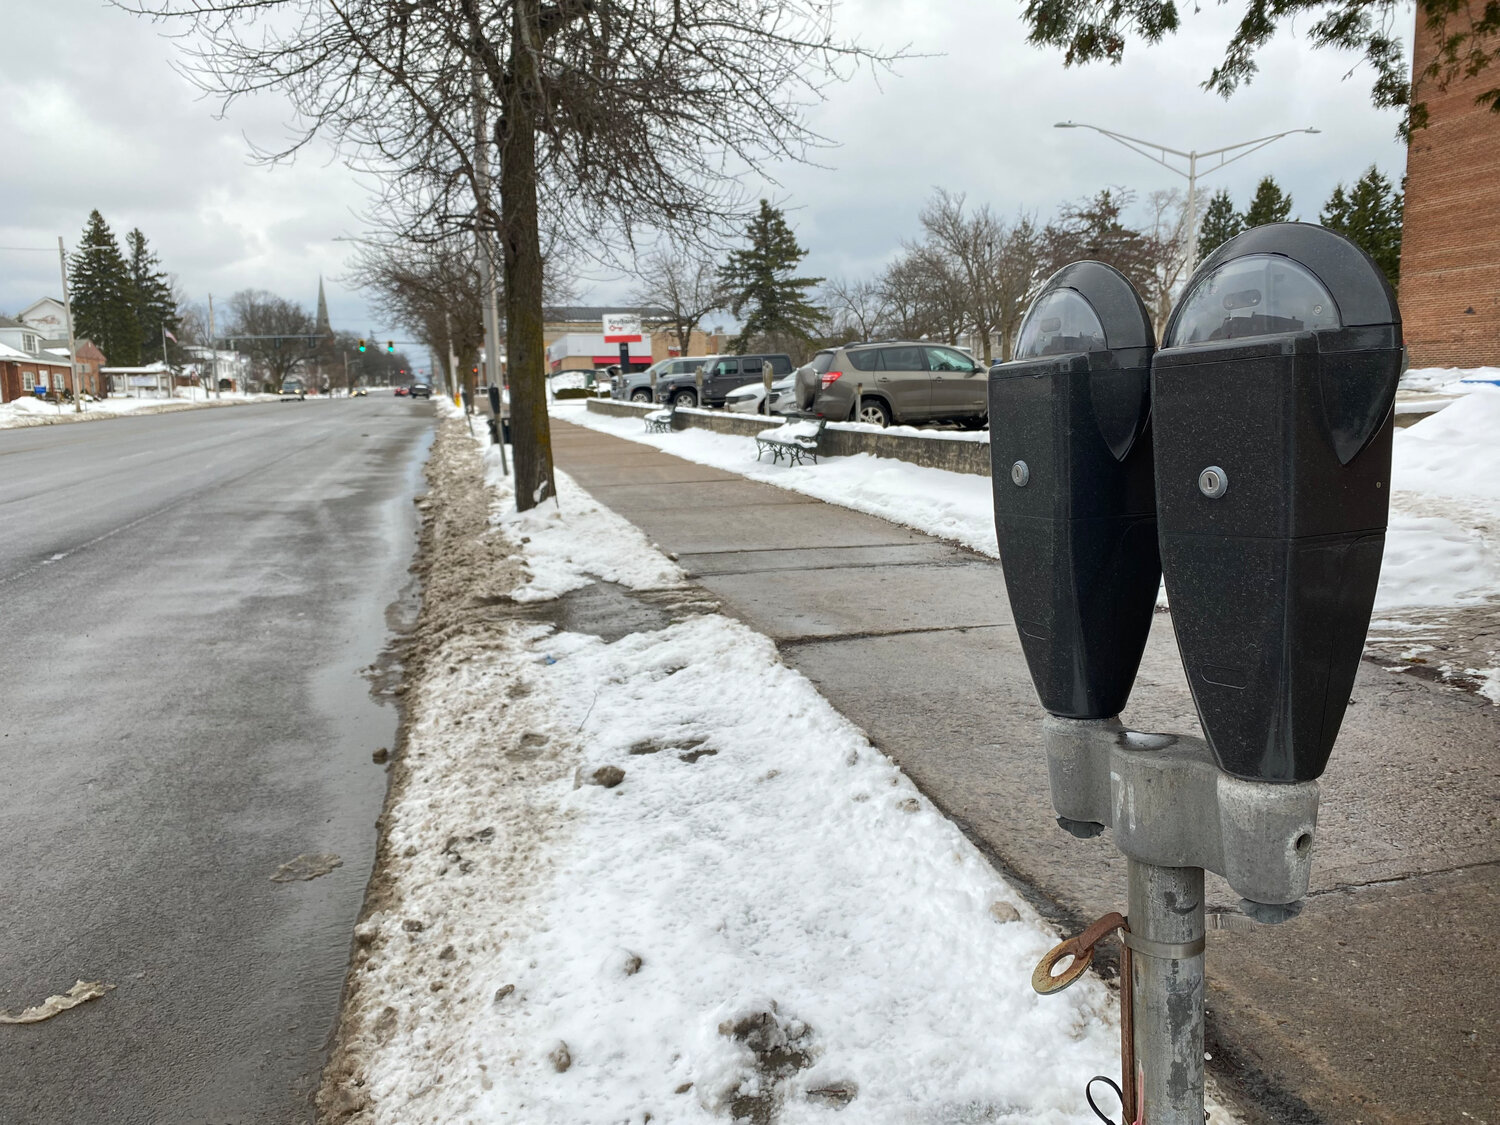 Parking on Elm Street in the Village of Potsdam is largely under utilized according to a recent Clarkson study on parking in the downtown business district. Adam Atkinson | NCTW